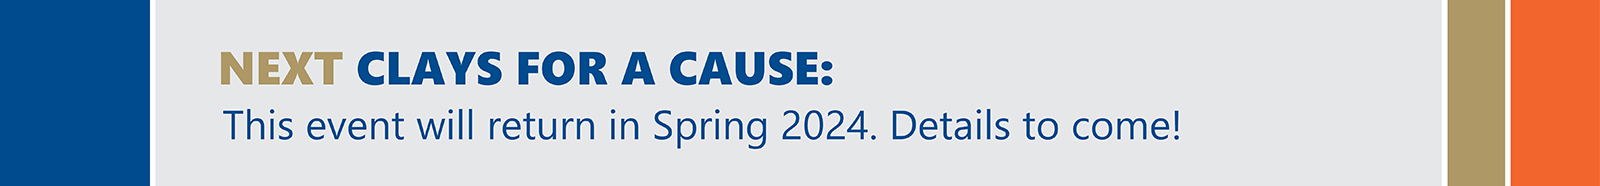 Clays for a Cause date: April 25, 2023